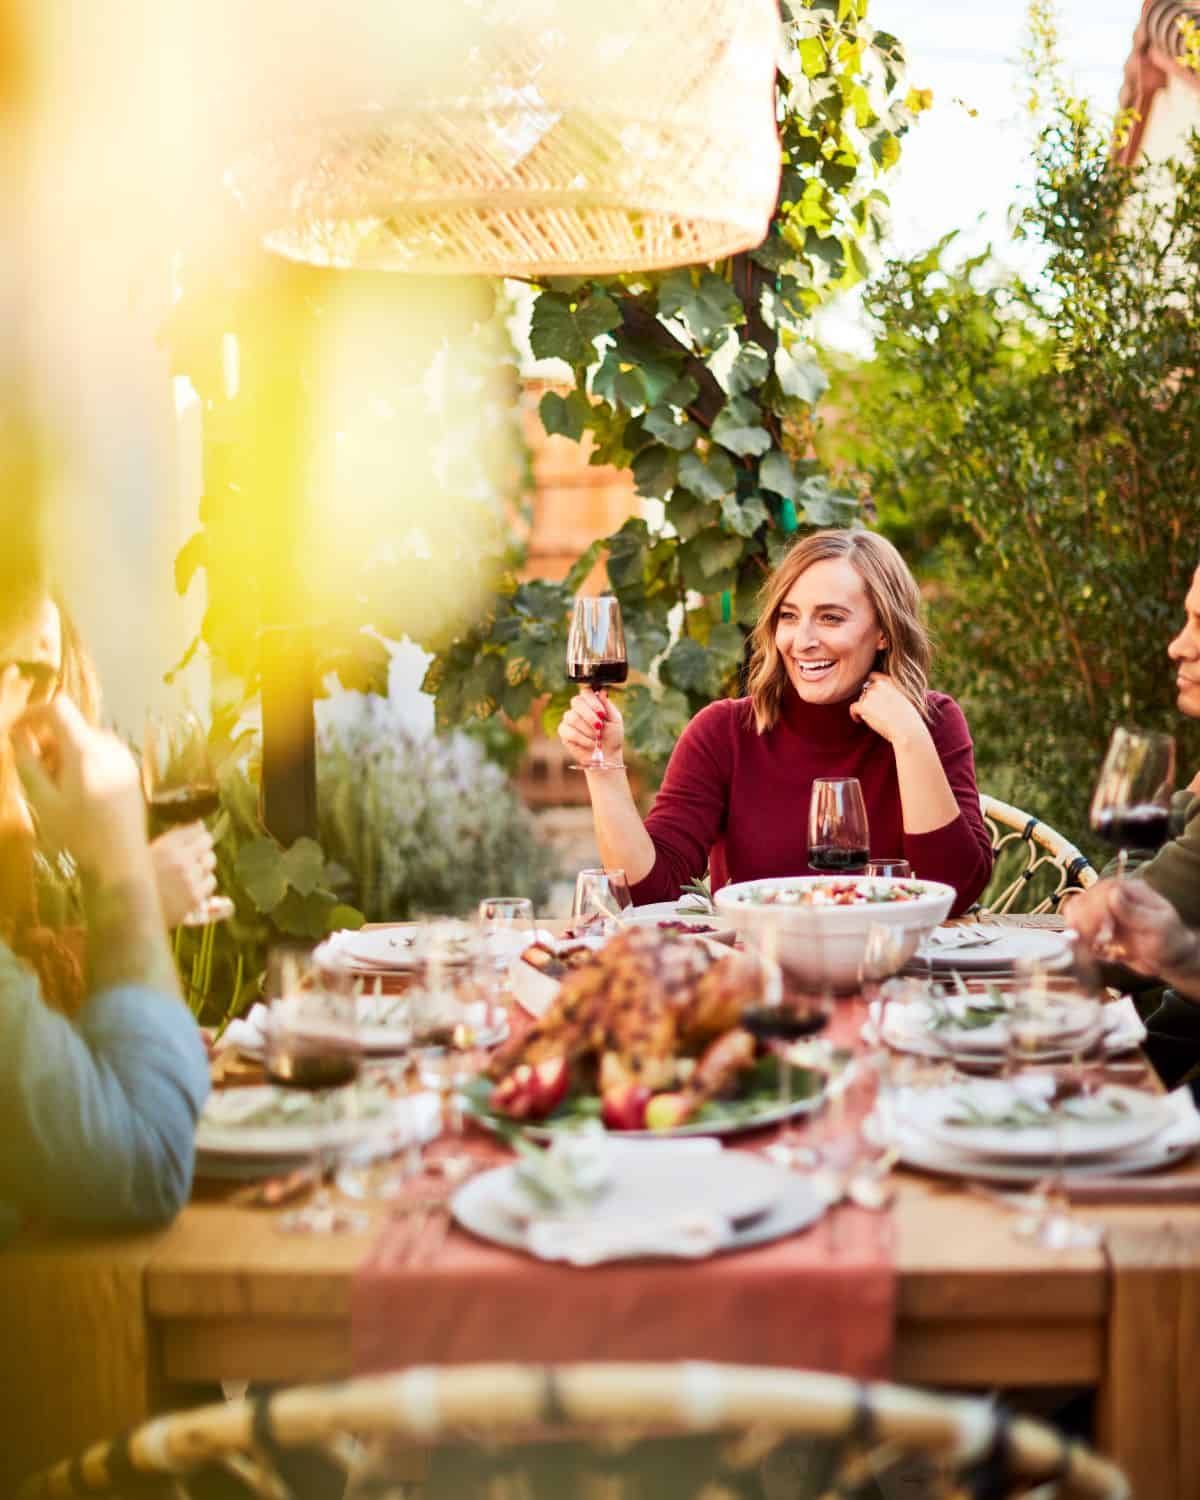 A dinner table for Thanksgiving with plates, wine glasses, a whole roasted turkey platter and a big bowl of salad in a blurry foreground with a clear background of a woman (Gaby) in a maroon sweater seated at the head of the table, raising a wine glass.